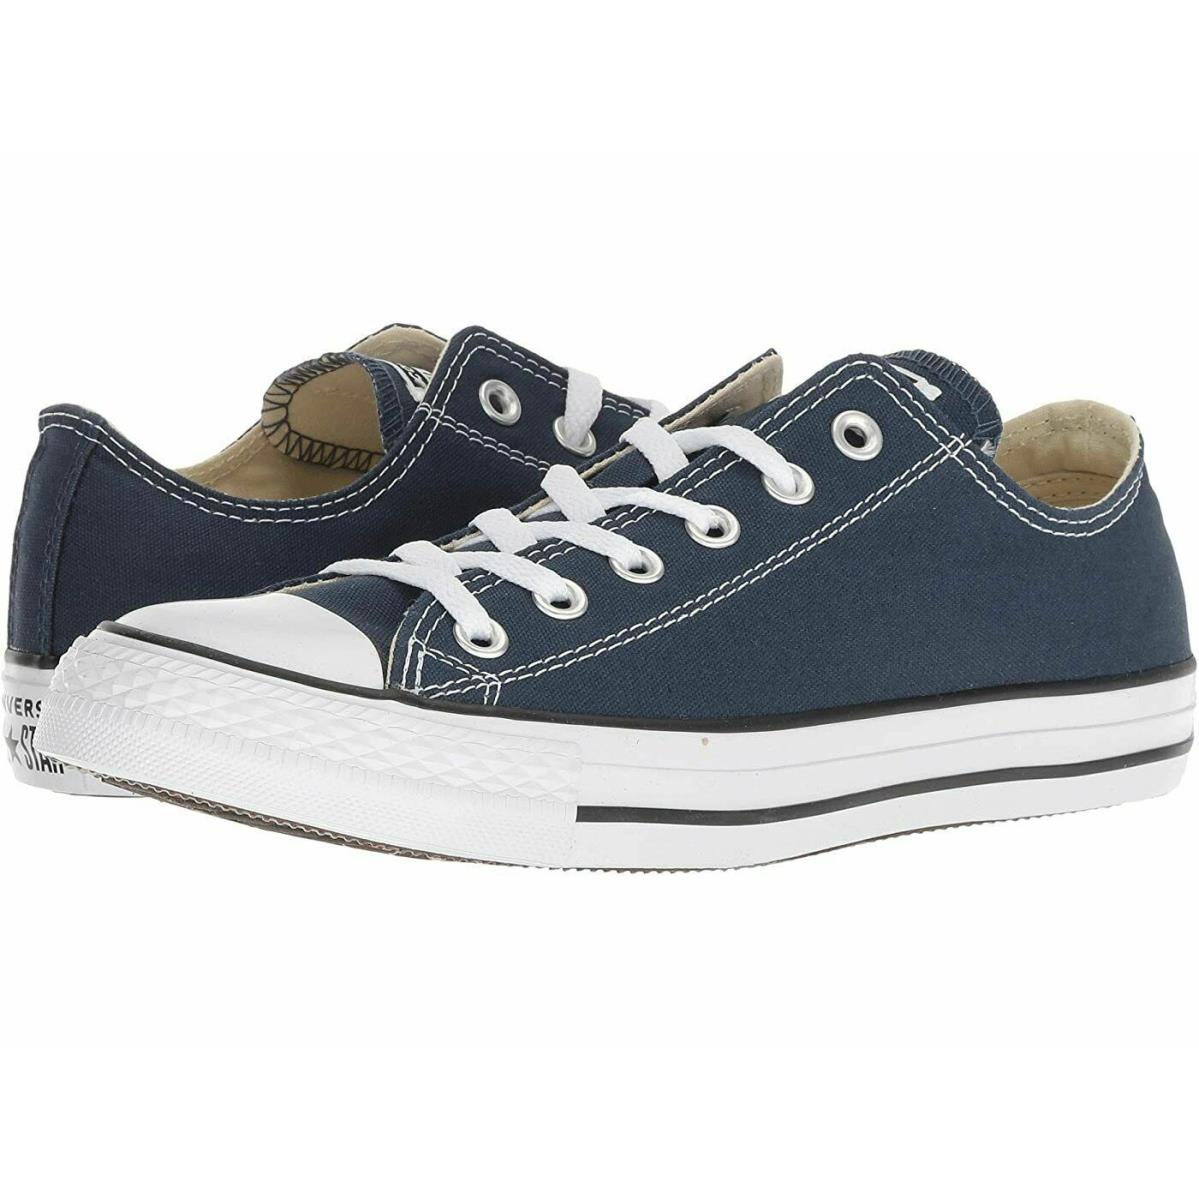 Converse Unisex All Star Chuck Taylor Low Top Athletic Shoes 4 Colors NAVY